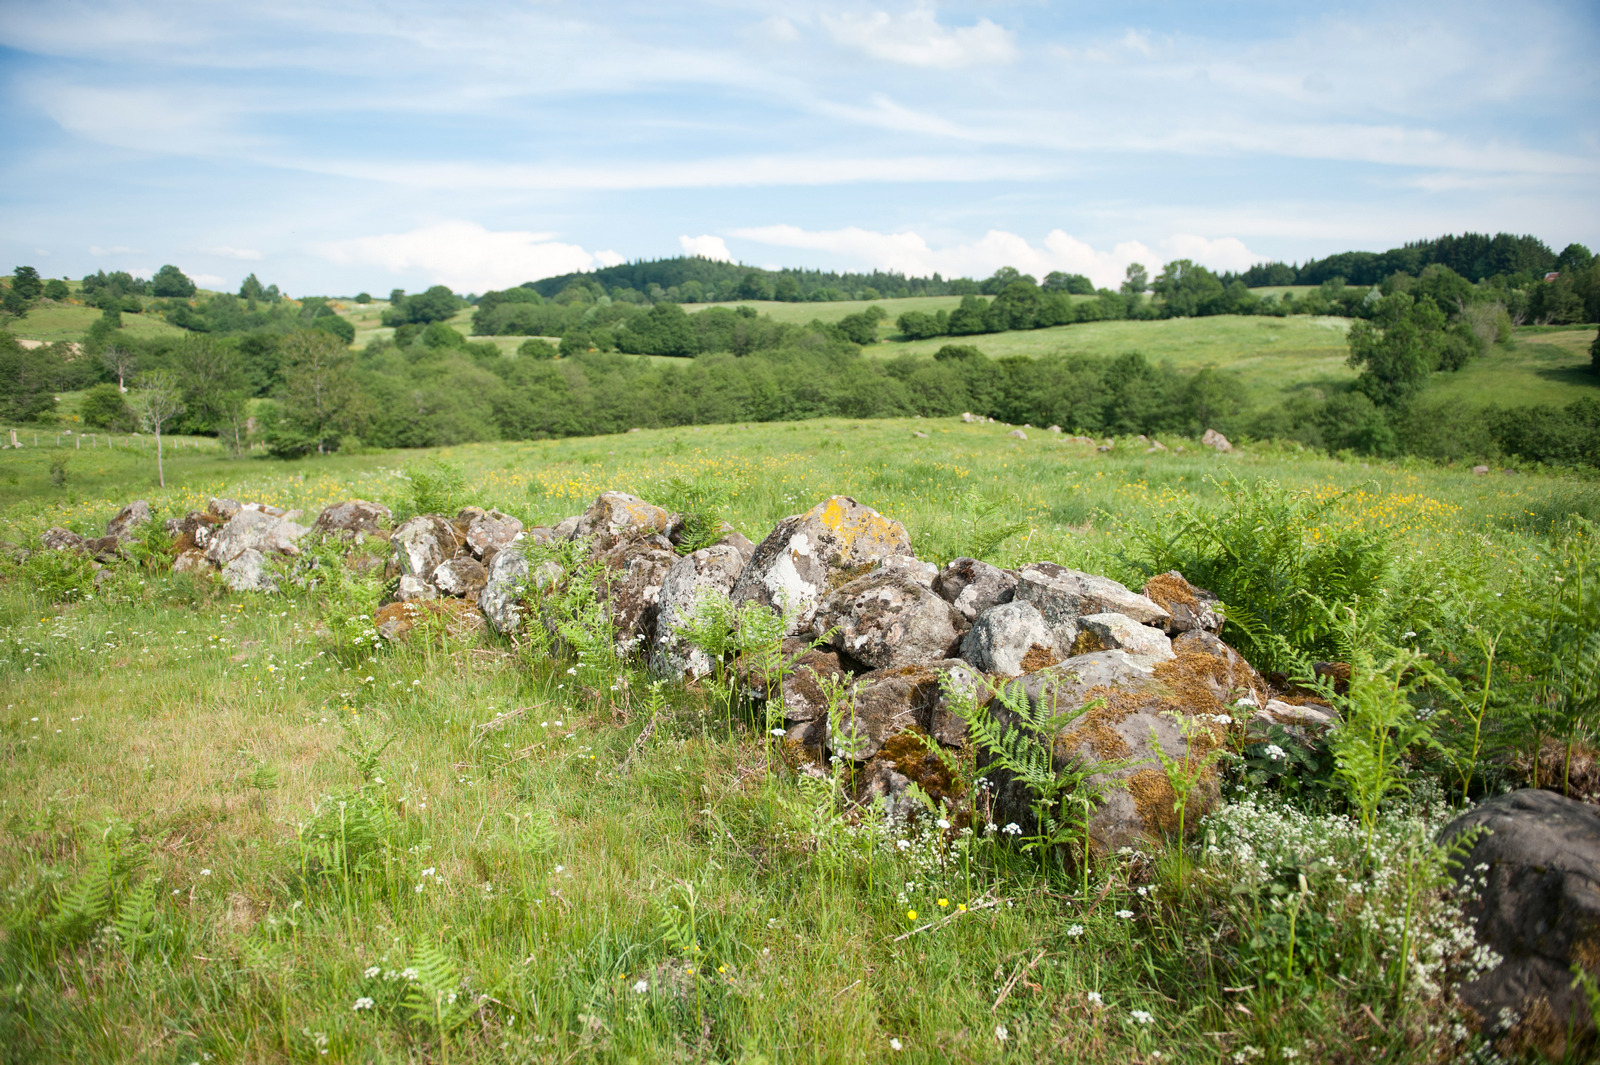 The artense plateau and its dry stone walls